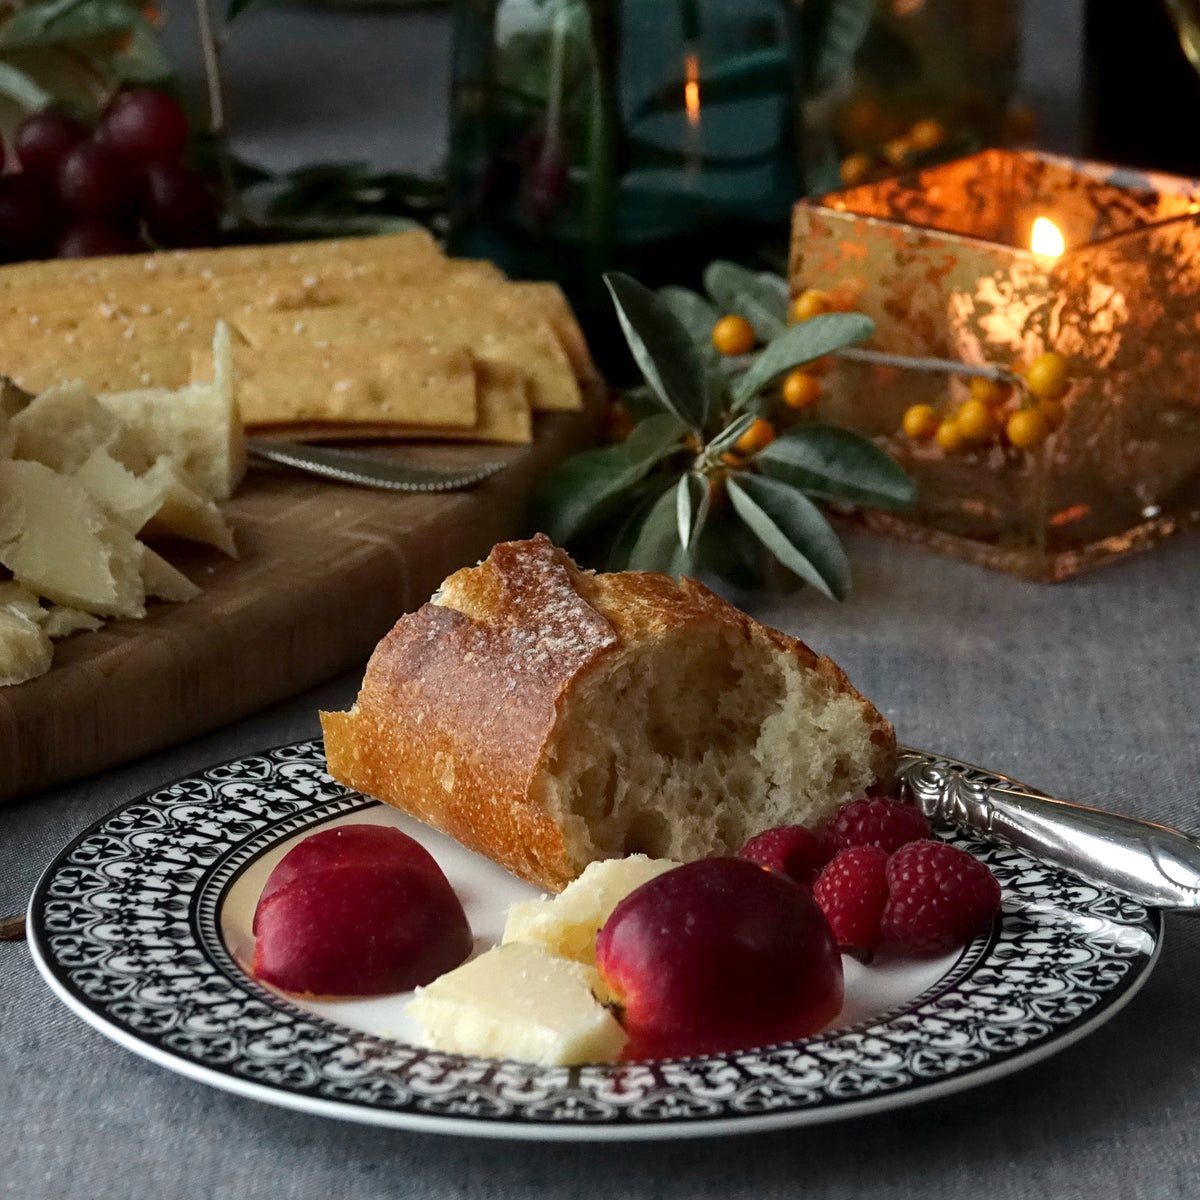 A plate with a chunk of bread, cheese, plums, and raspberries, set on an exquisite Casablanca Rimmed Salad Plate by Caskata Artisanal Home adorned with hand-decorated details. In the background, a candle, grapes, and crackers complete the inviting scene.